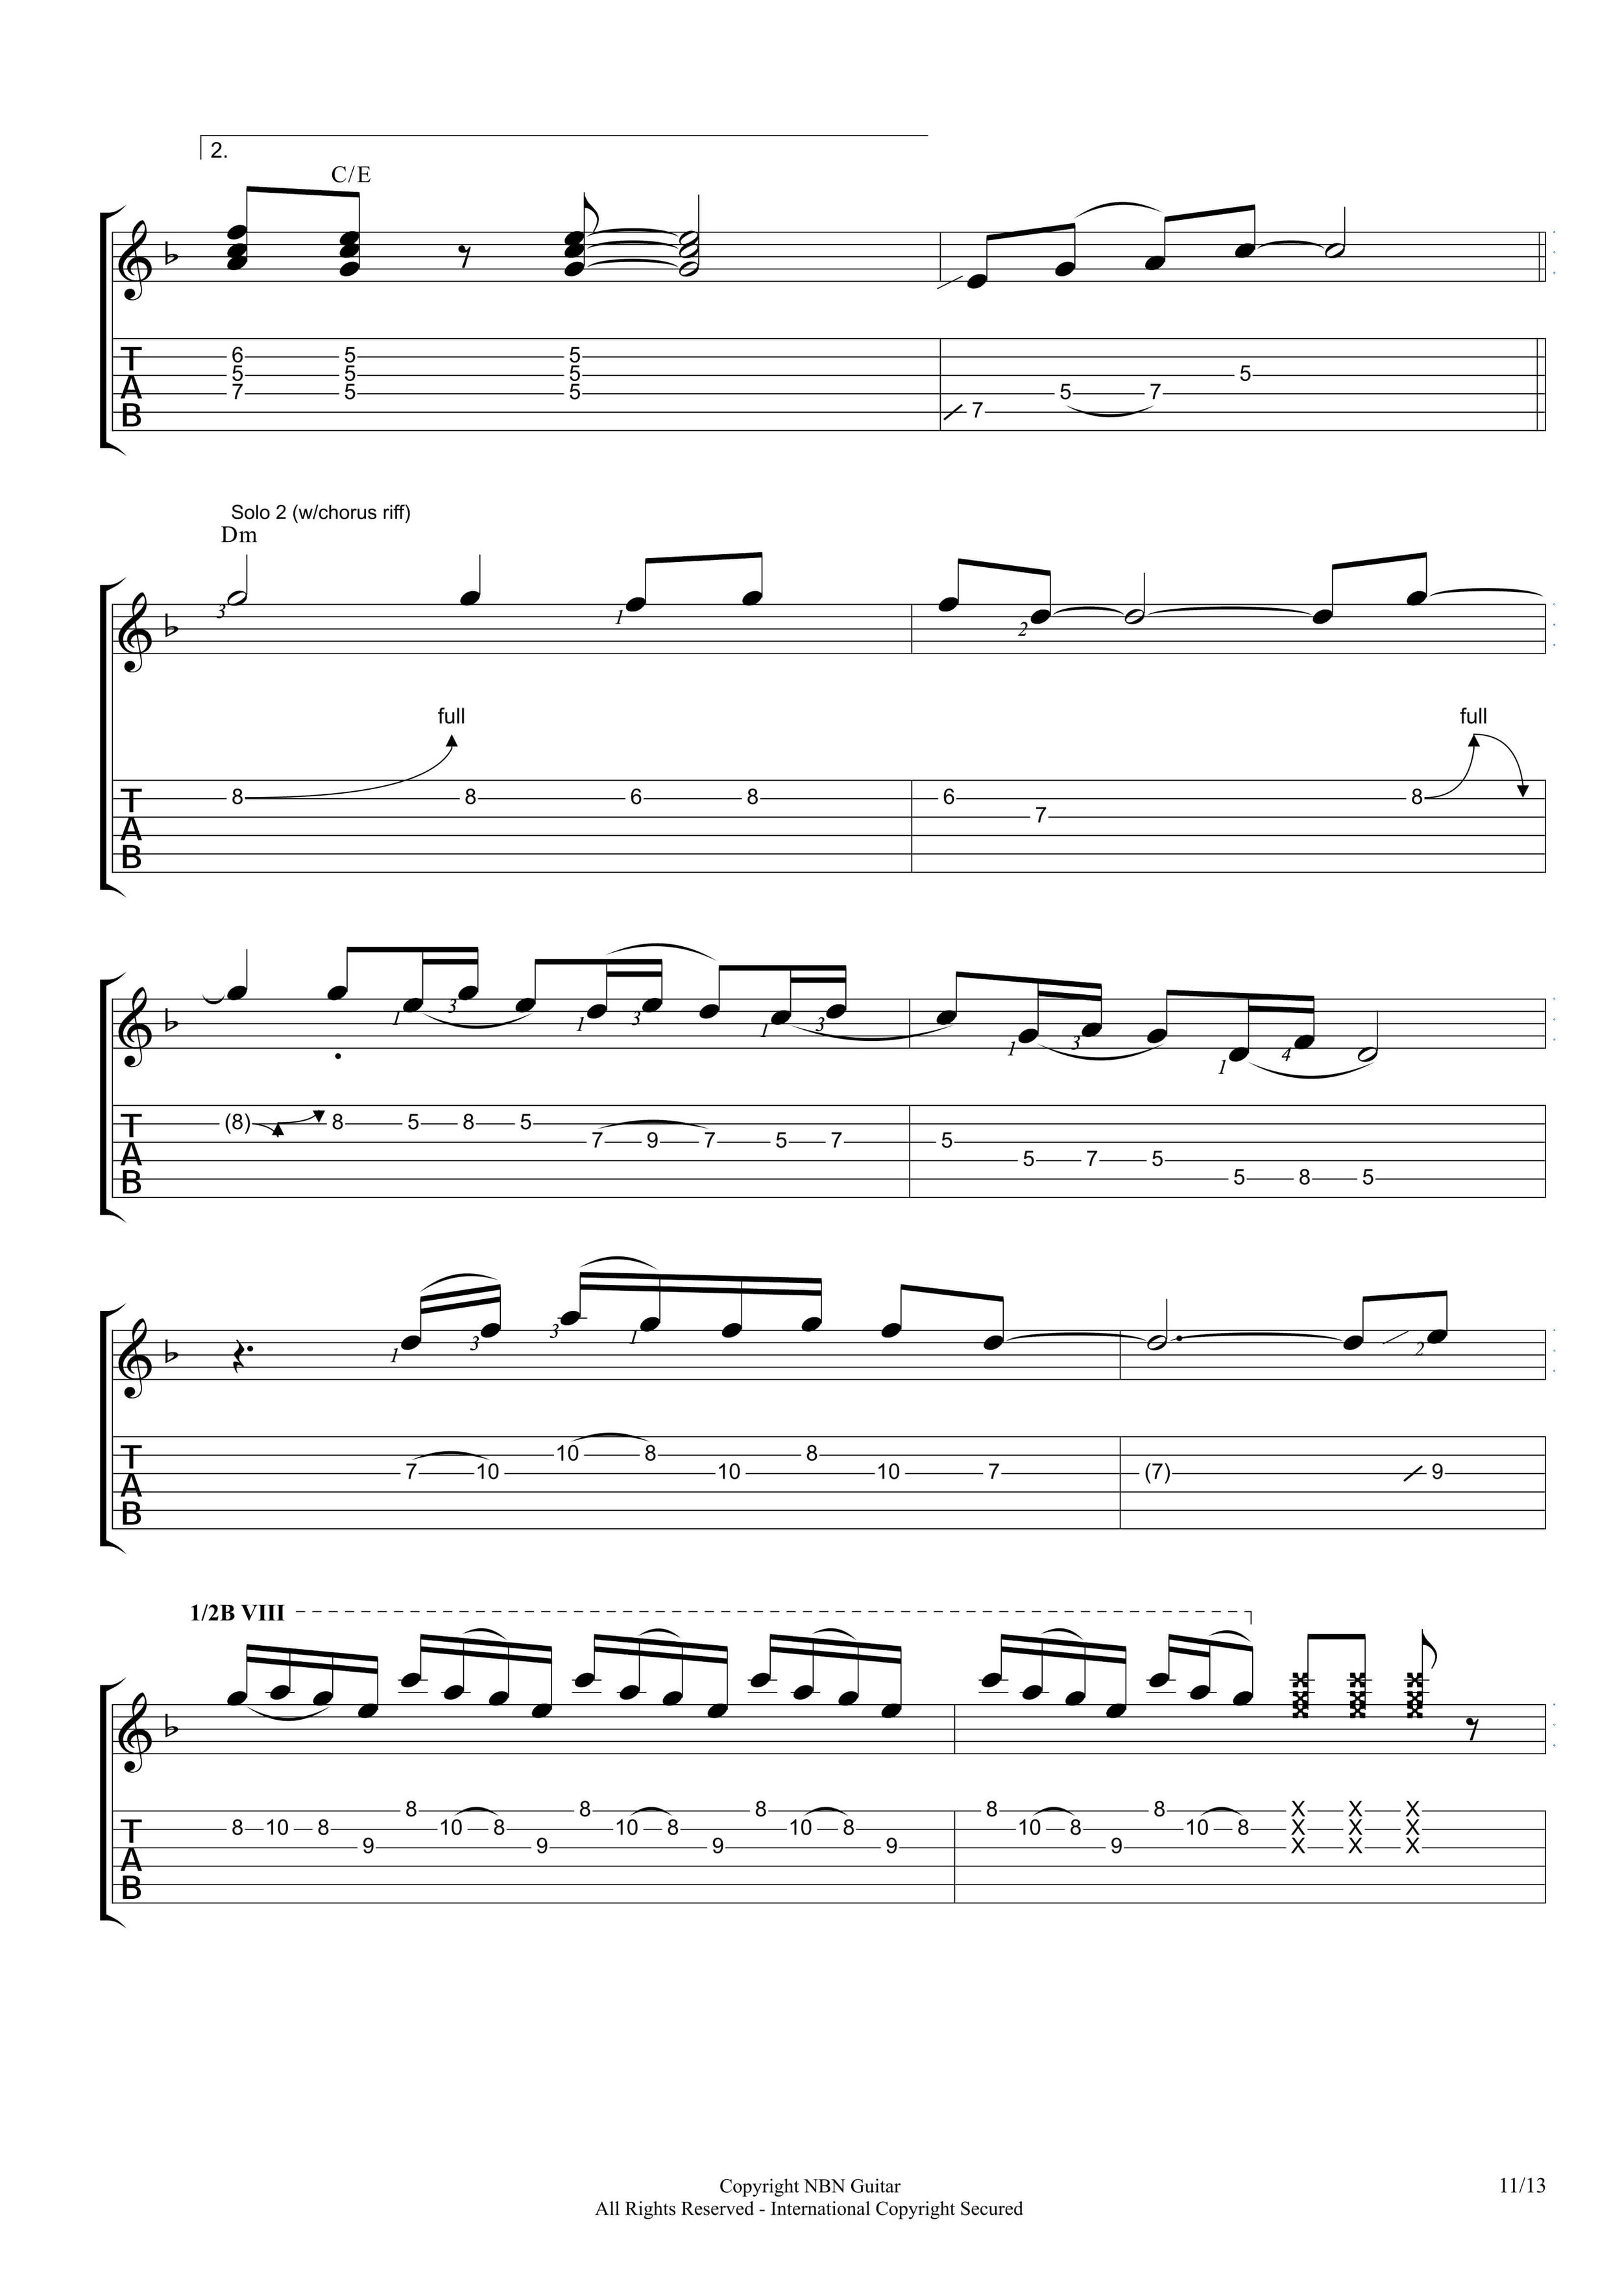 Sultans of Swing (Acoustic Solo)-p11.jpg